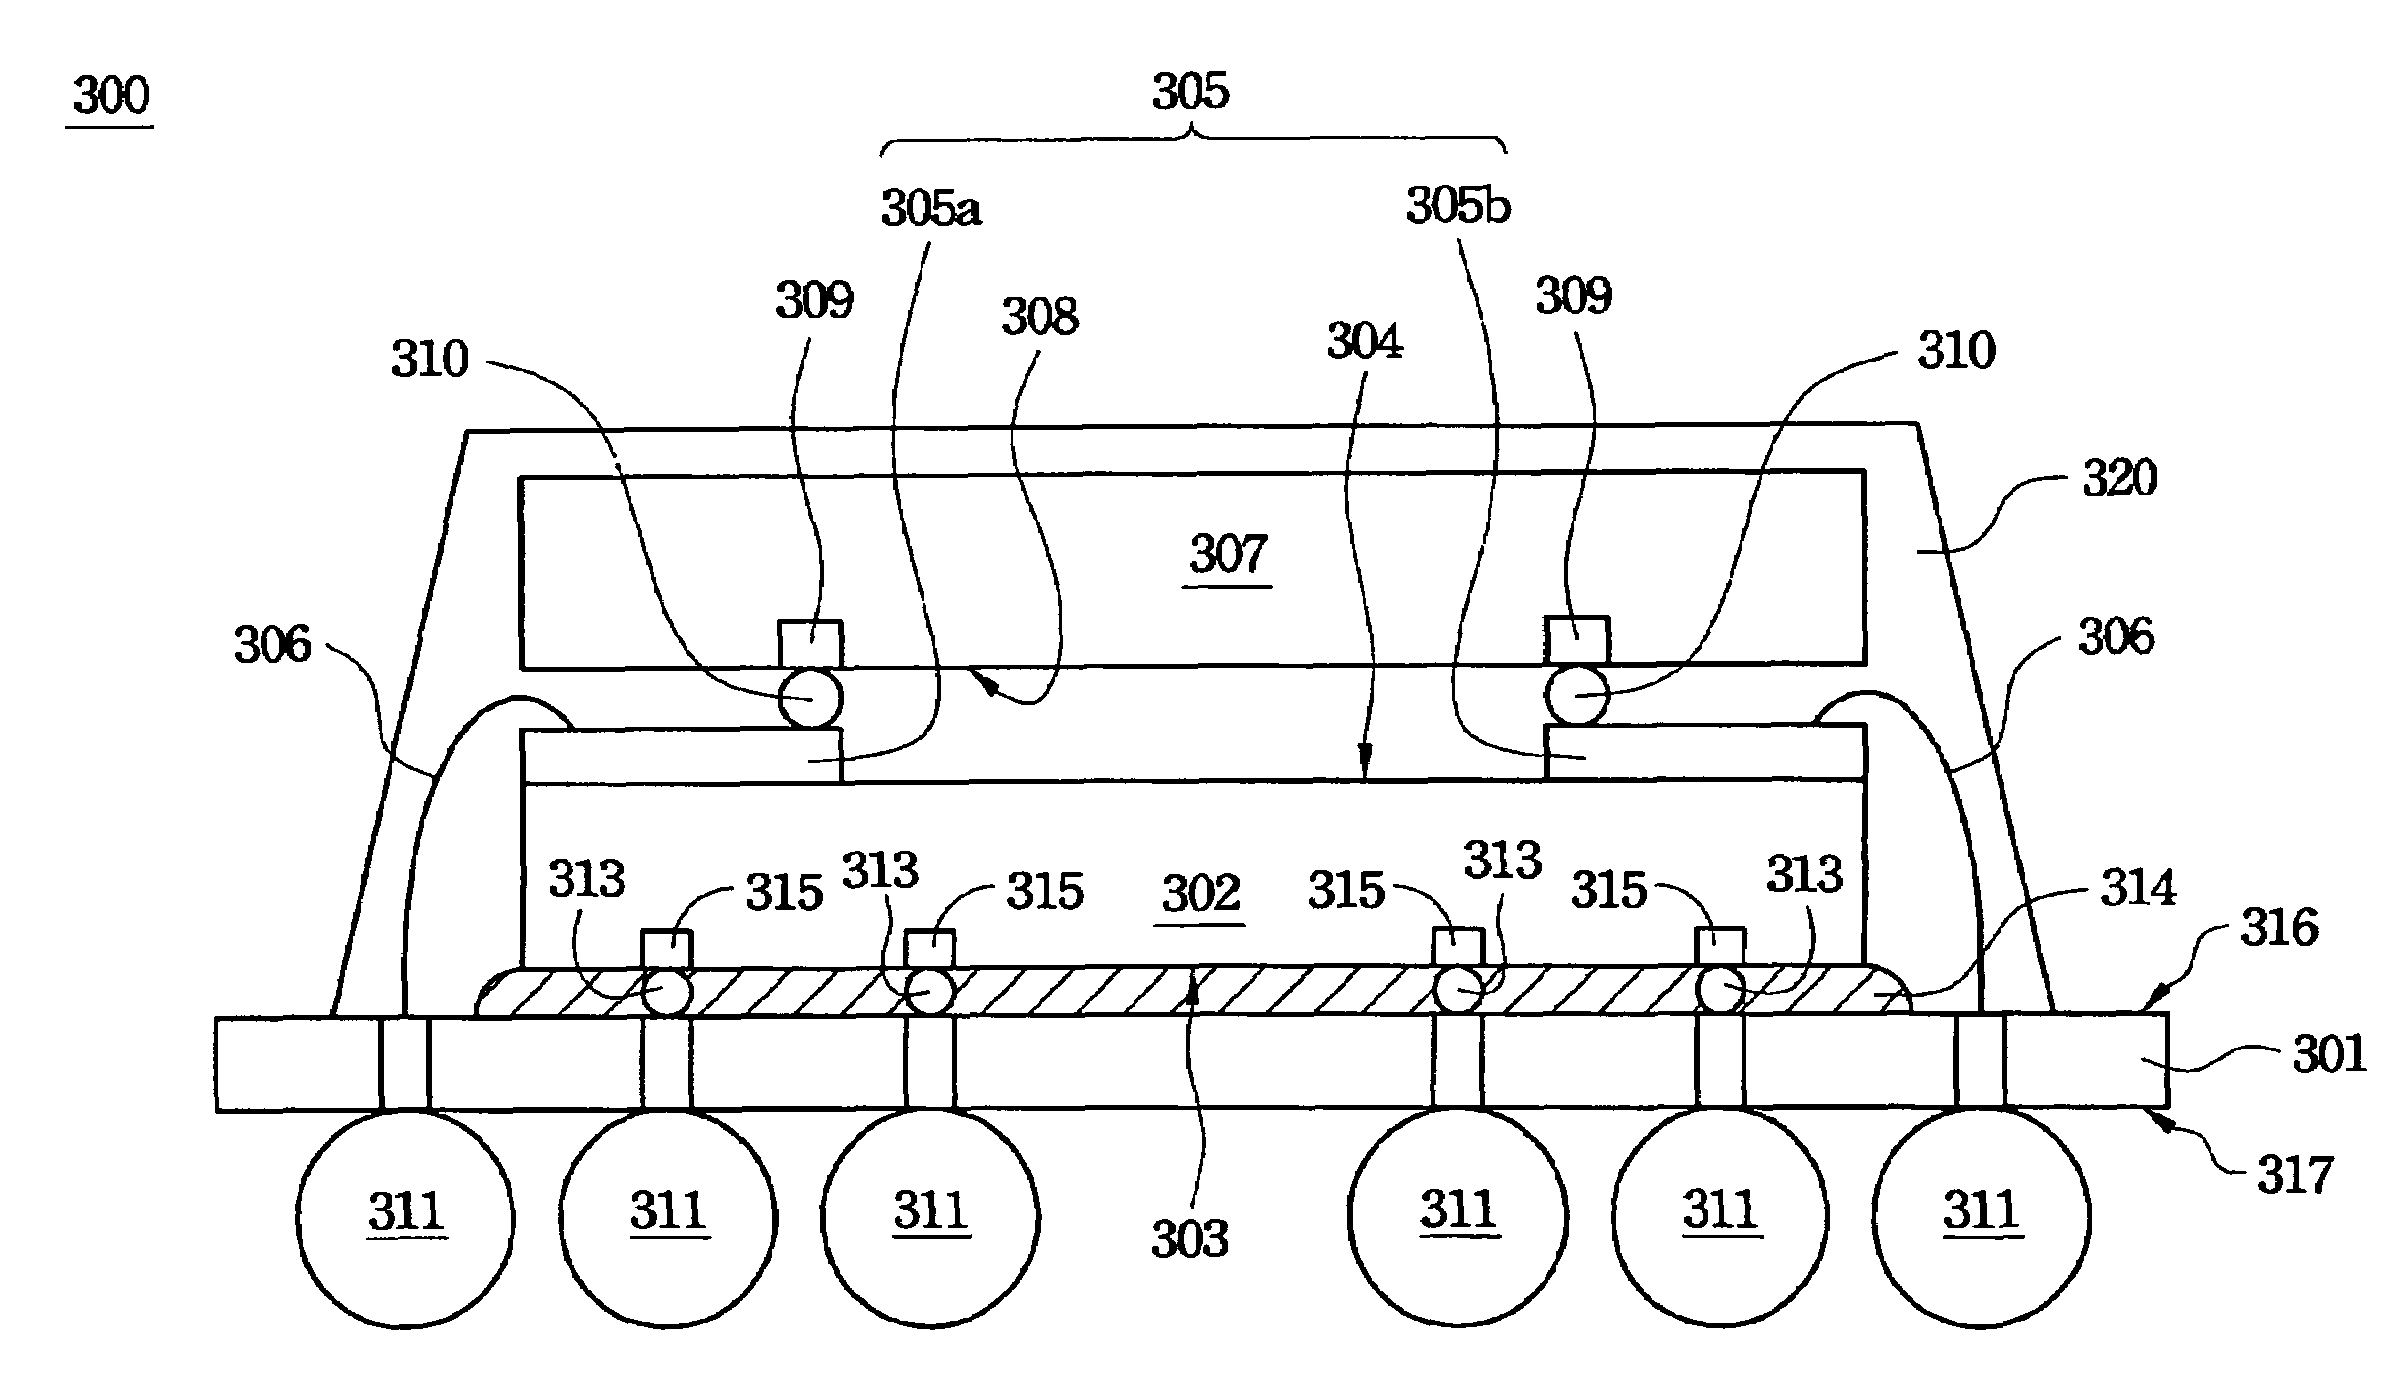 Chip-stacked package structure